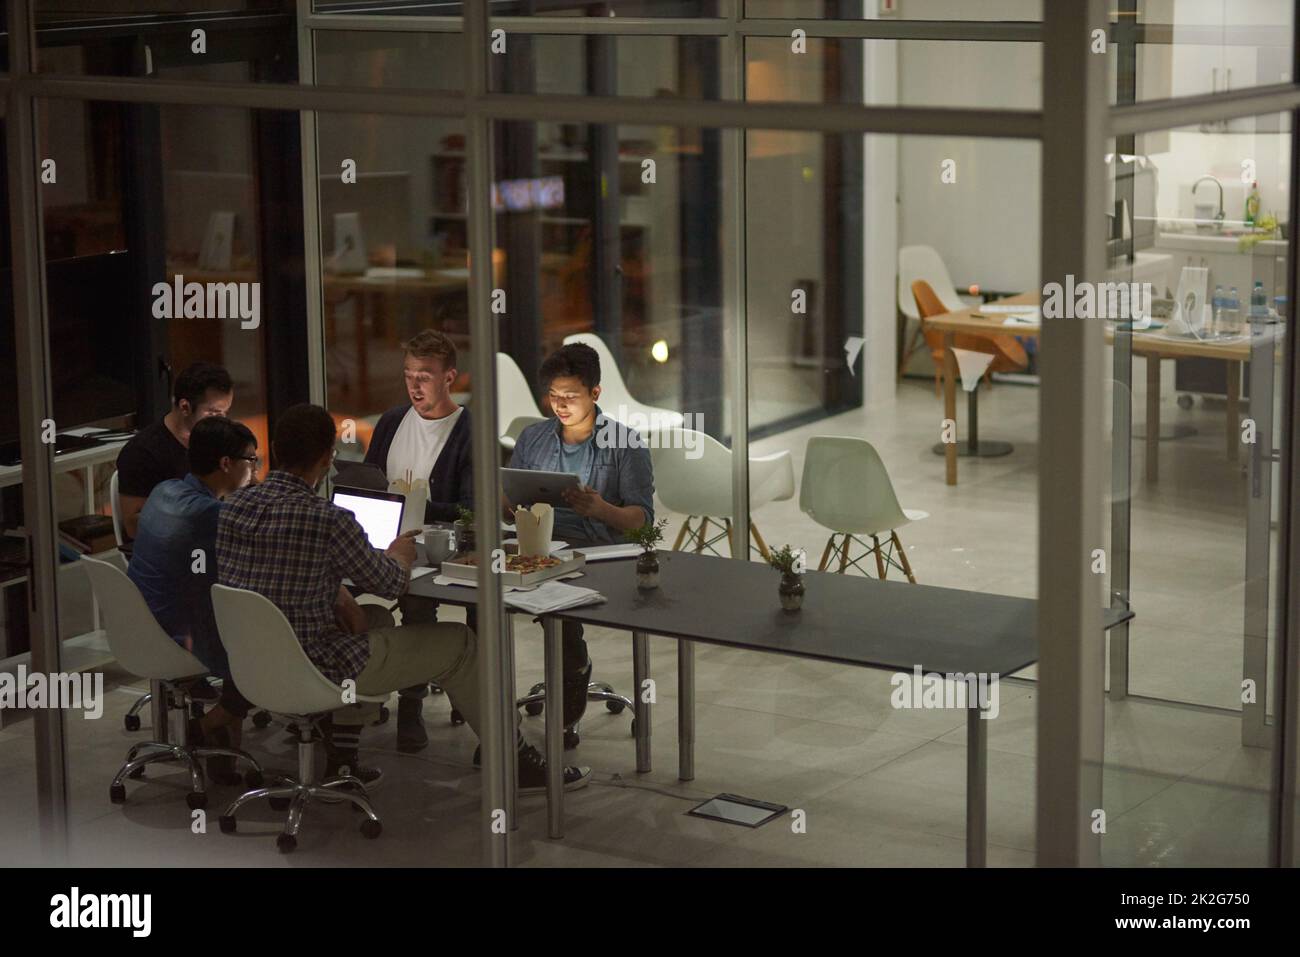 Putting in some extra hours at work. Shot of employees working in an office at night. Stock Photo